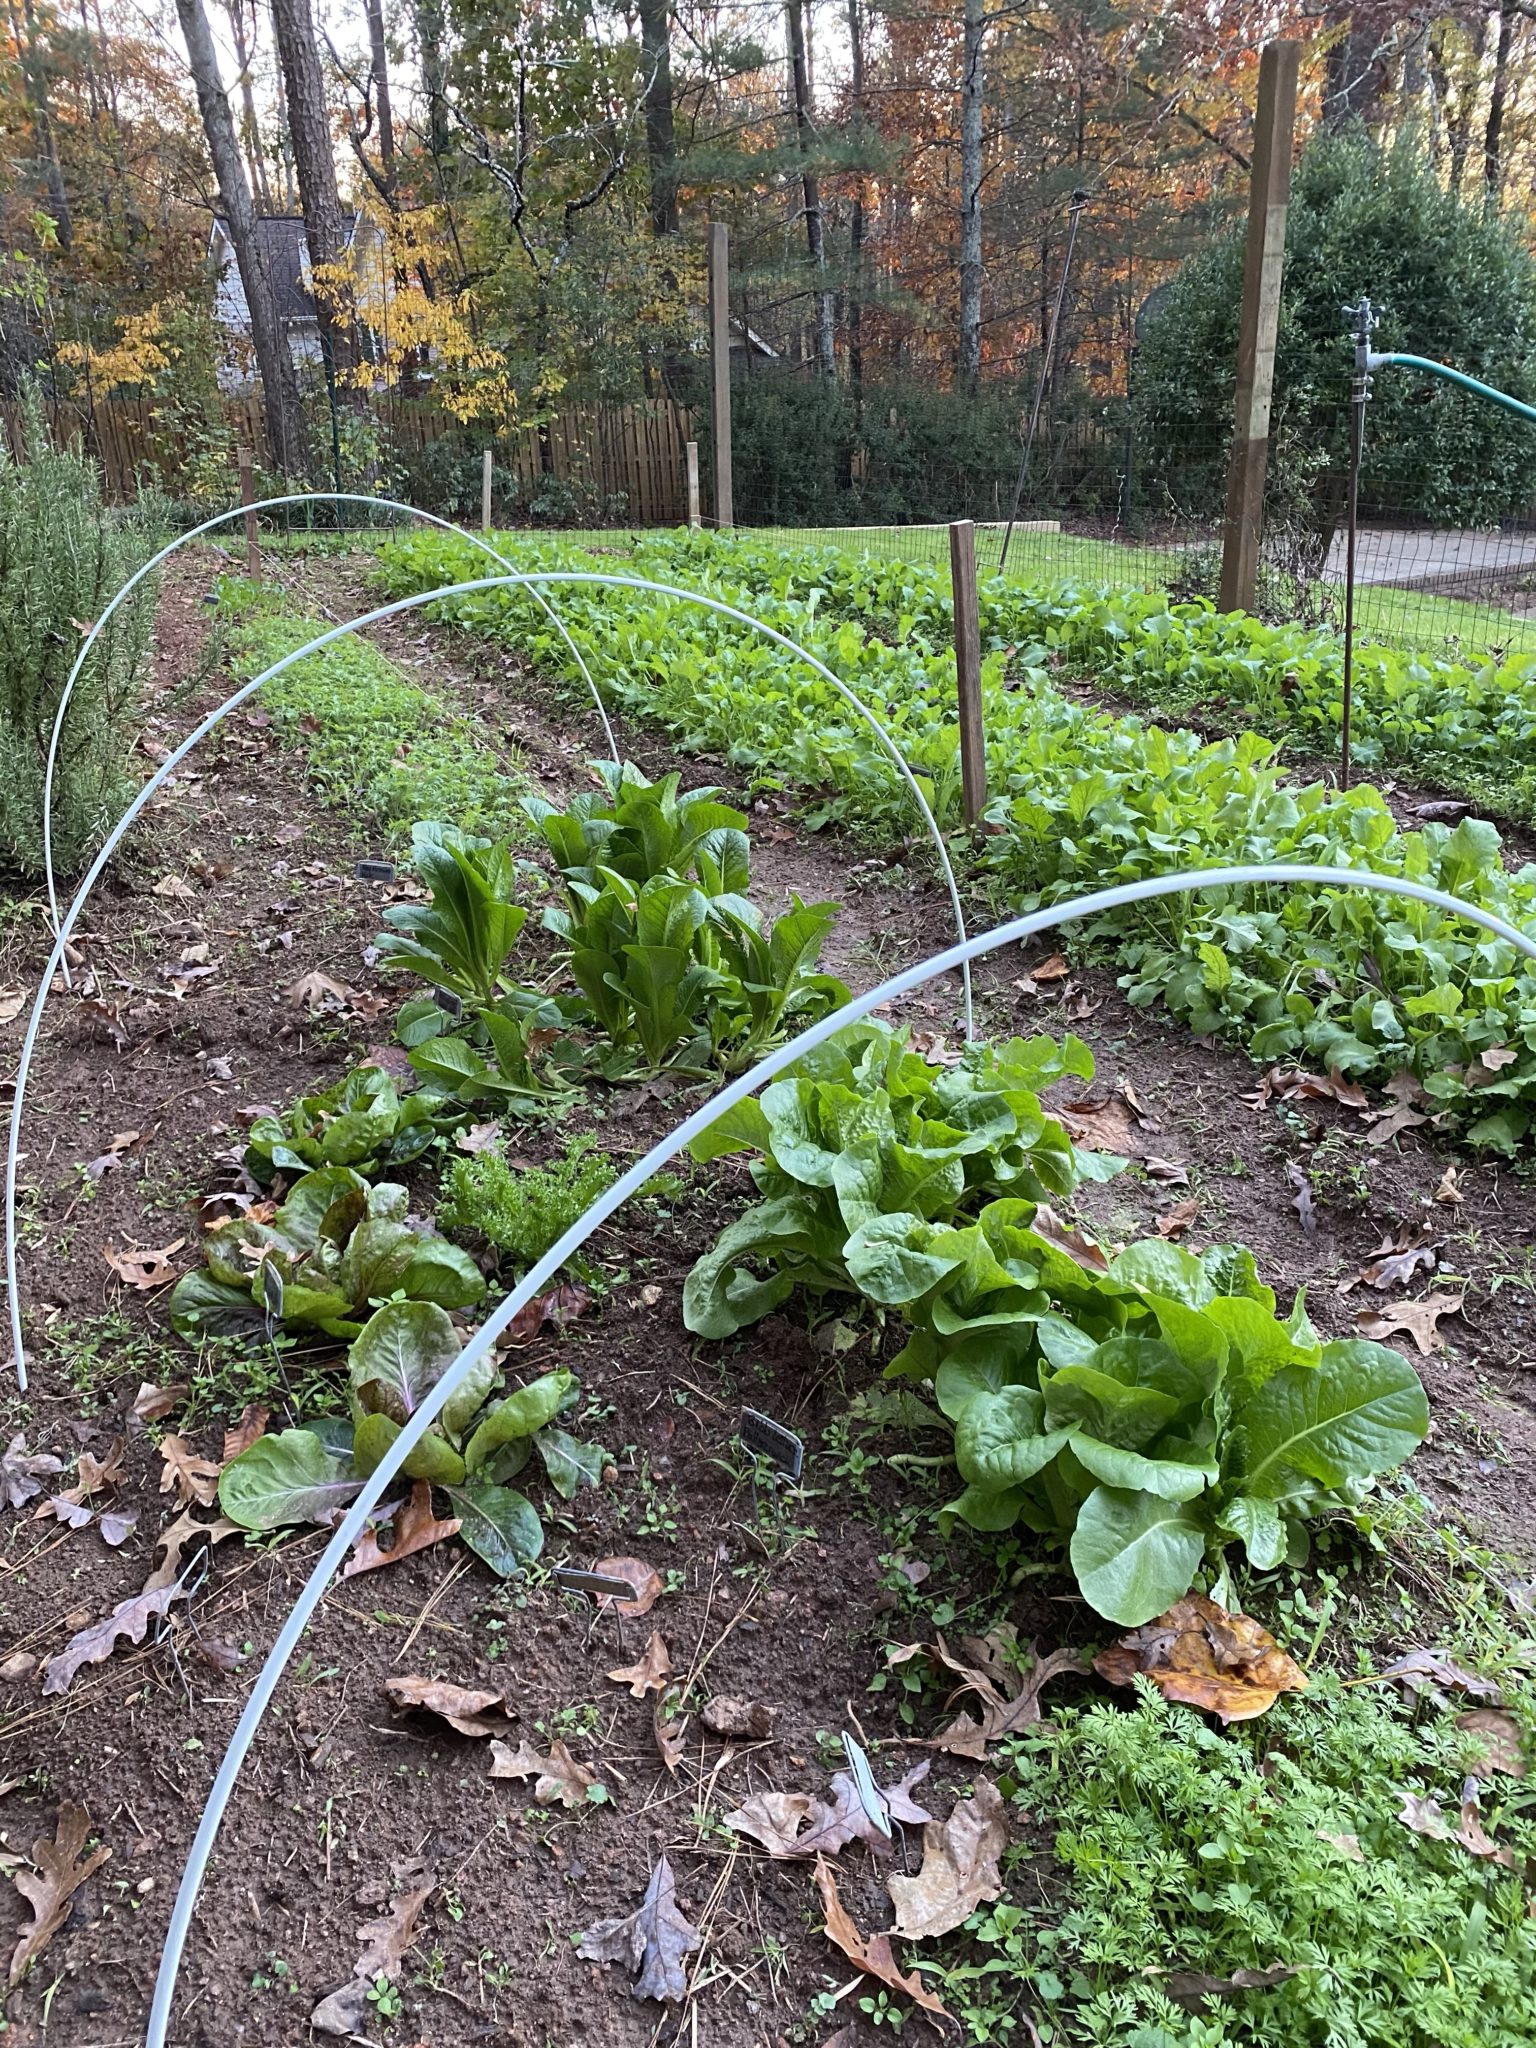 beginning to set up covering over winter lettuces in a garden